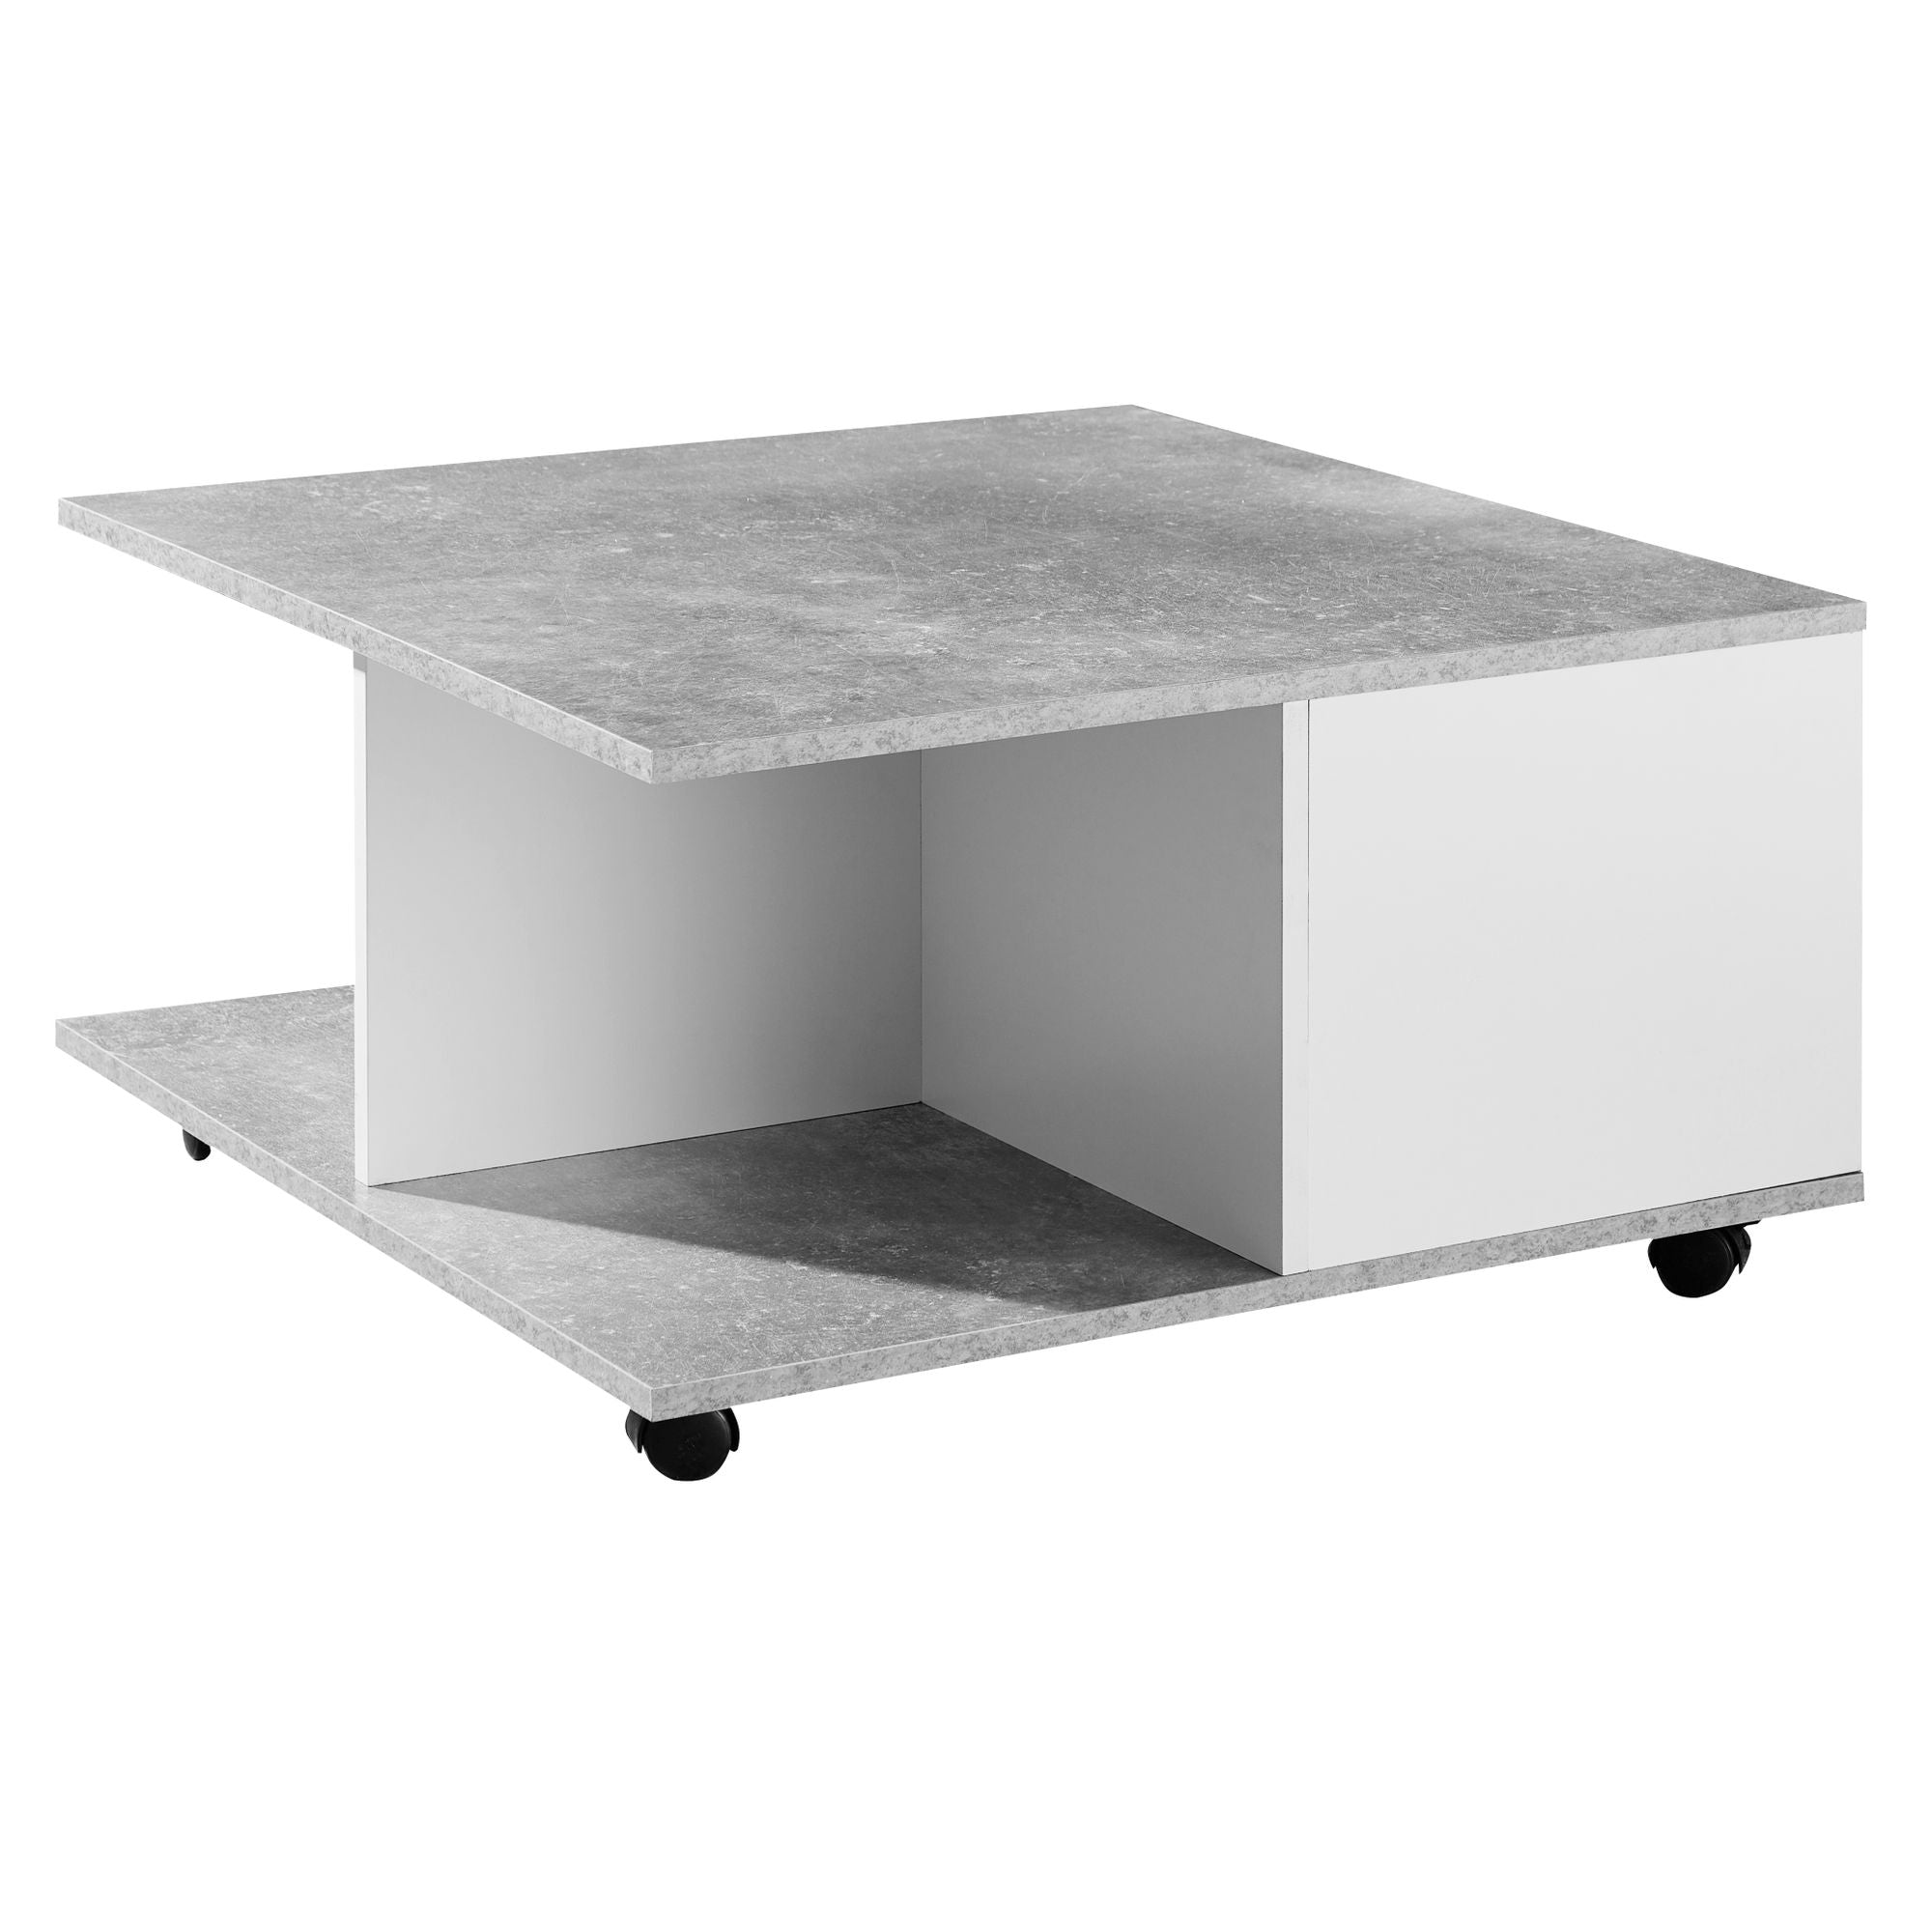 Nancy's Davidson Coffee Table - Coffee Table - Square - 2 Drawers - Storage Compartment - On Wheels - White - Cement Gray - Engineered Wood - 70 x 70 cm